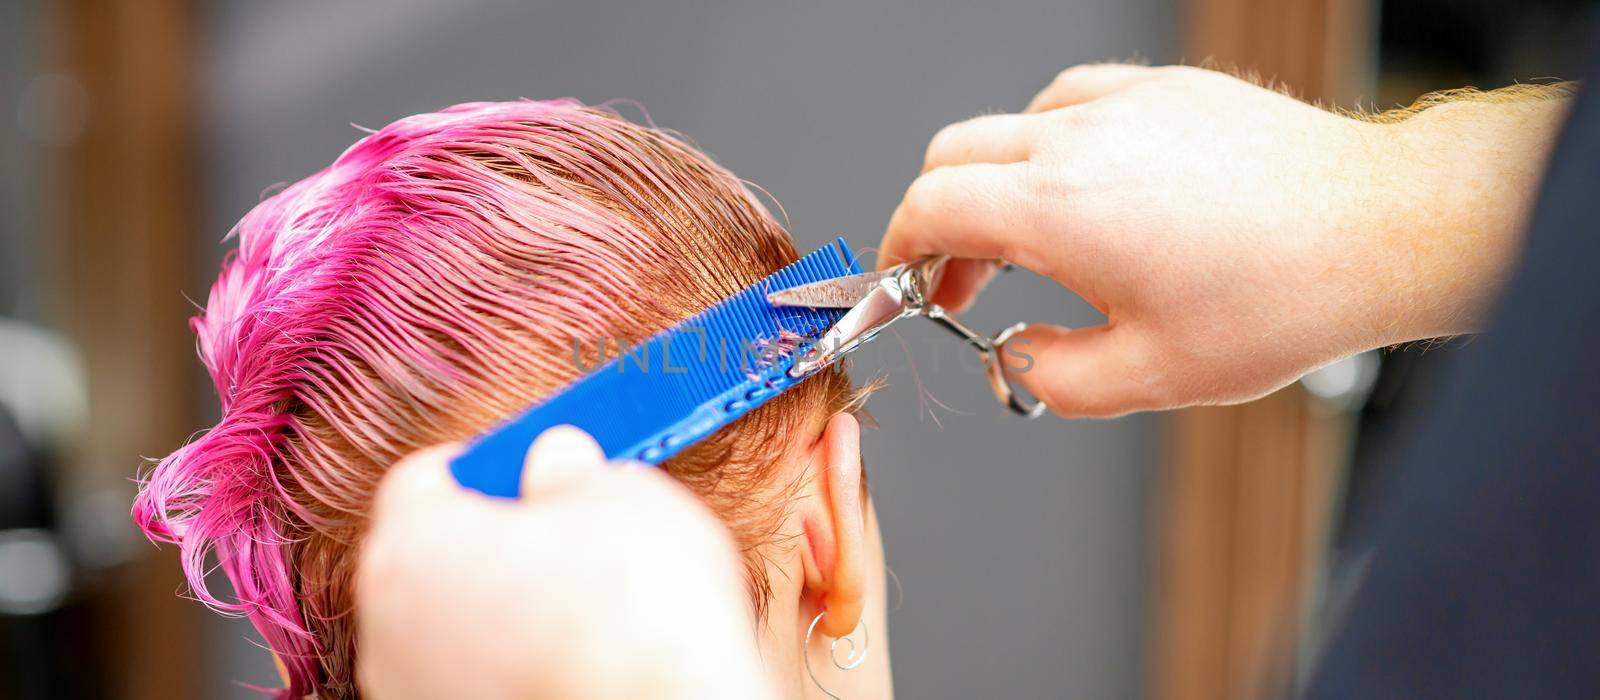 Professional hairstylist is cutting short pink hair with scissors in hair salon close up. by okskukuruza